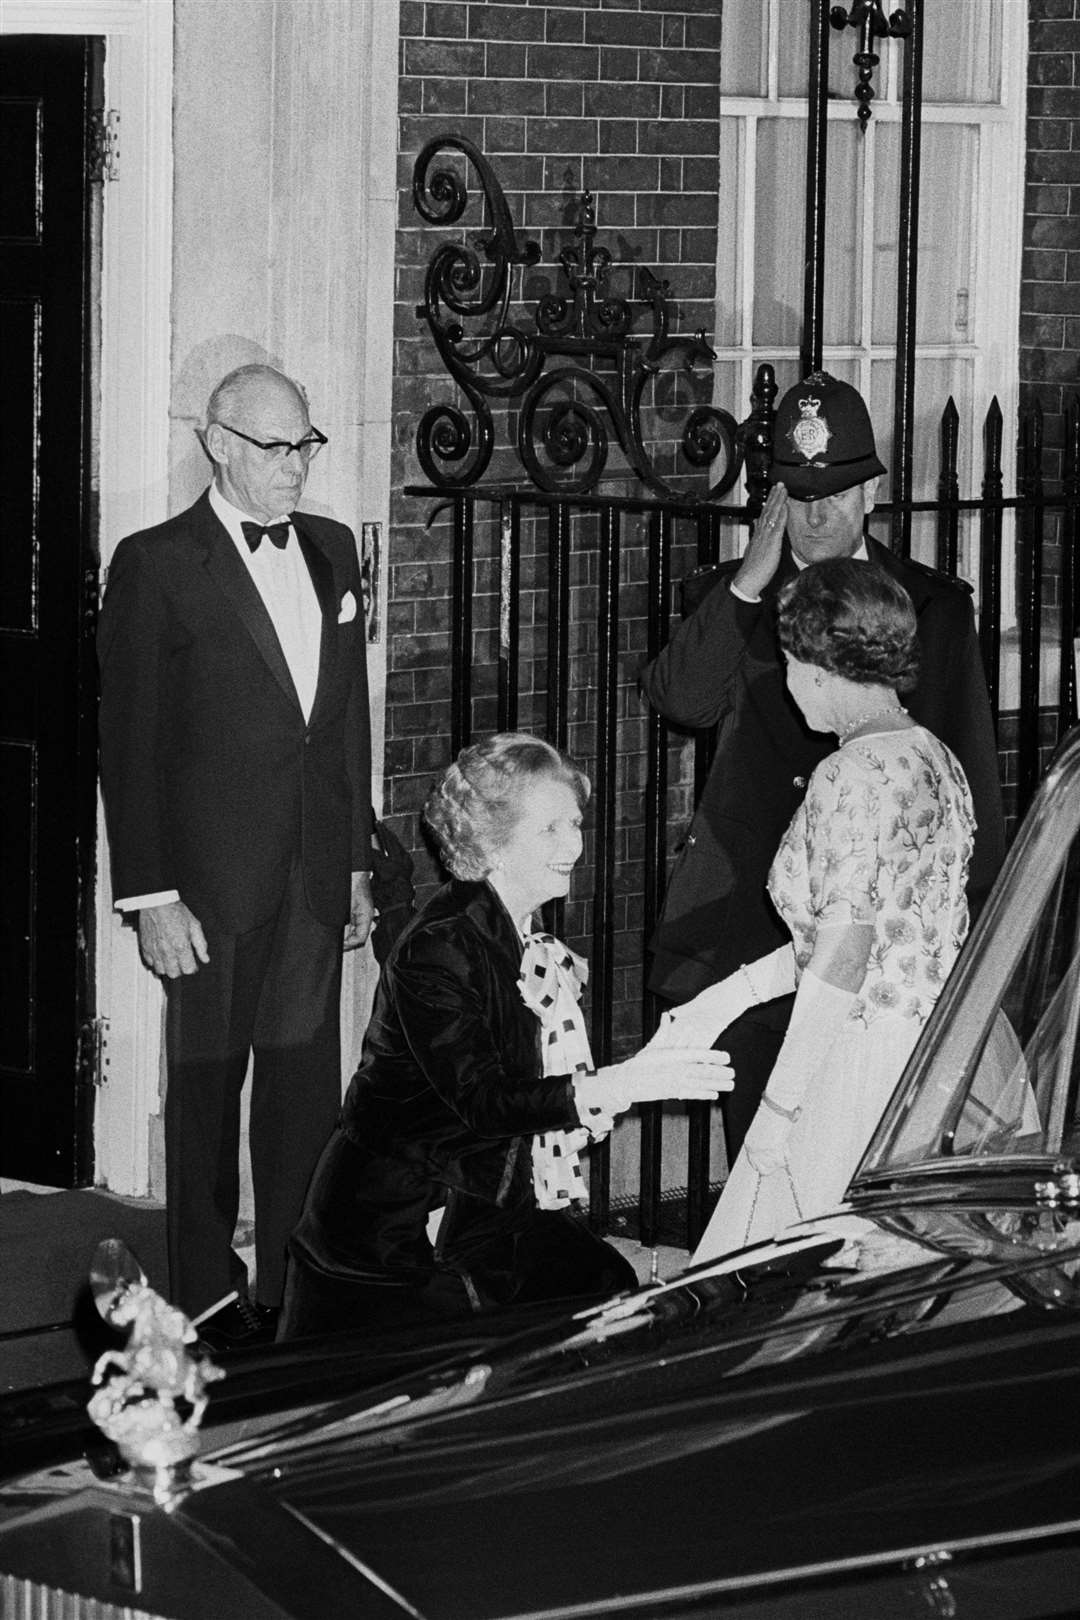 Margaret Thatcher curtseying to the Queen as she arrived for a dinner at 10 Downing Street in 1985 (PA)